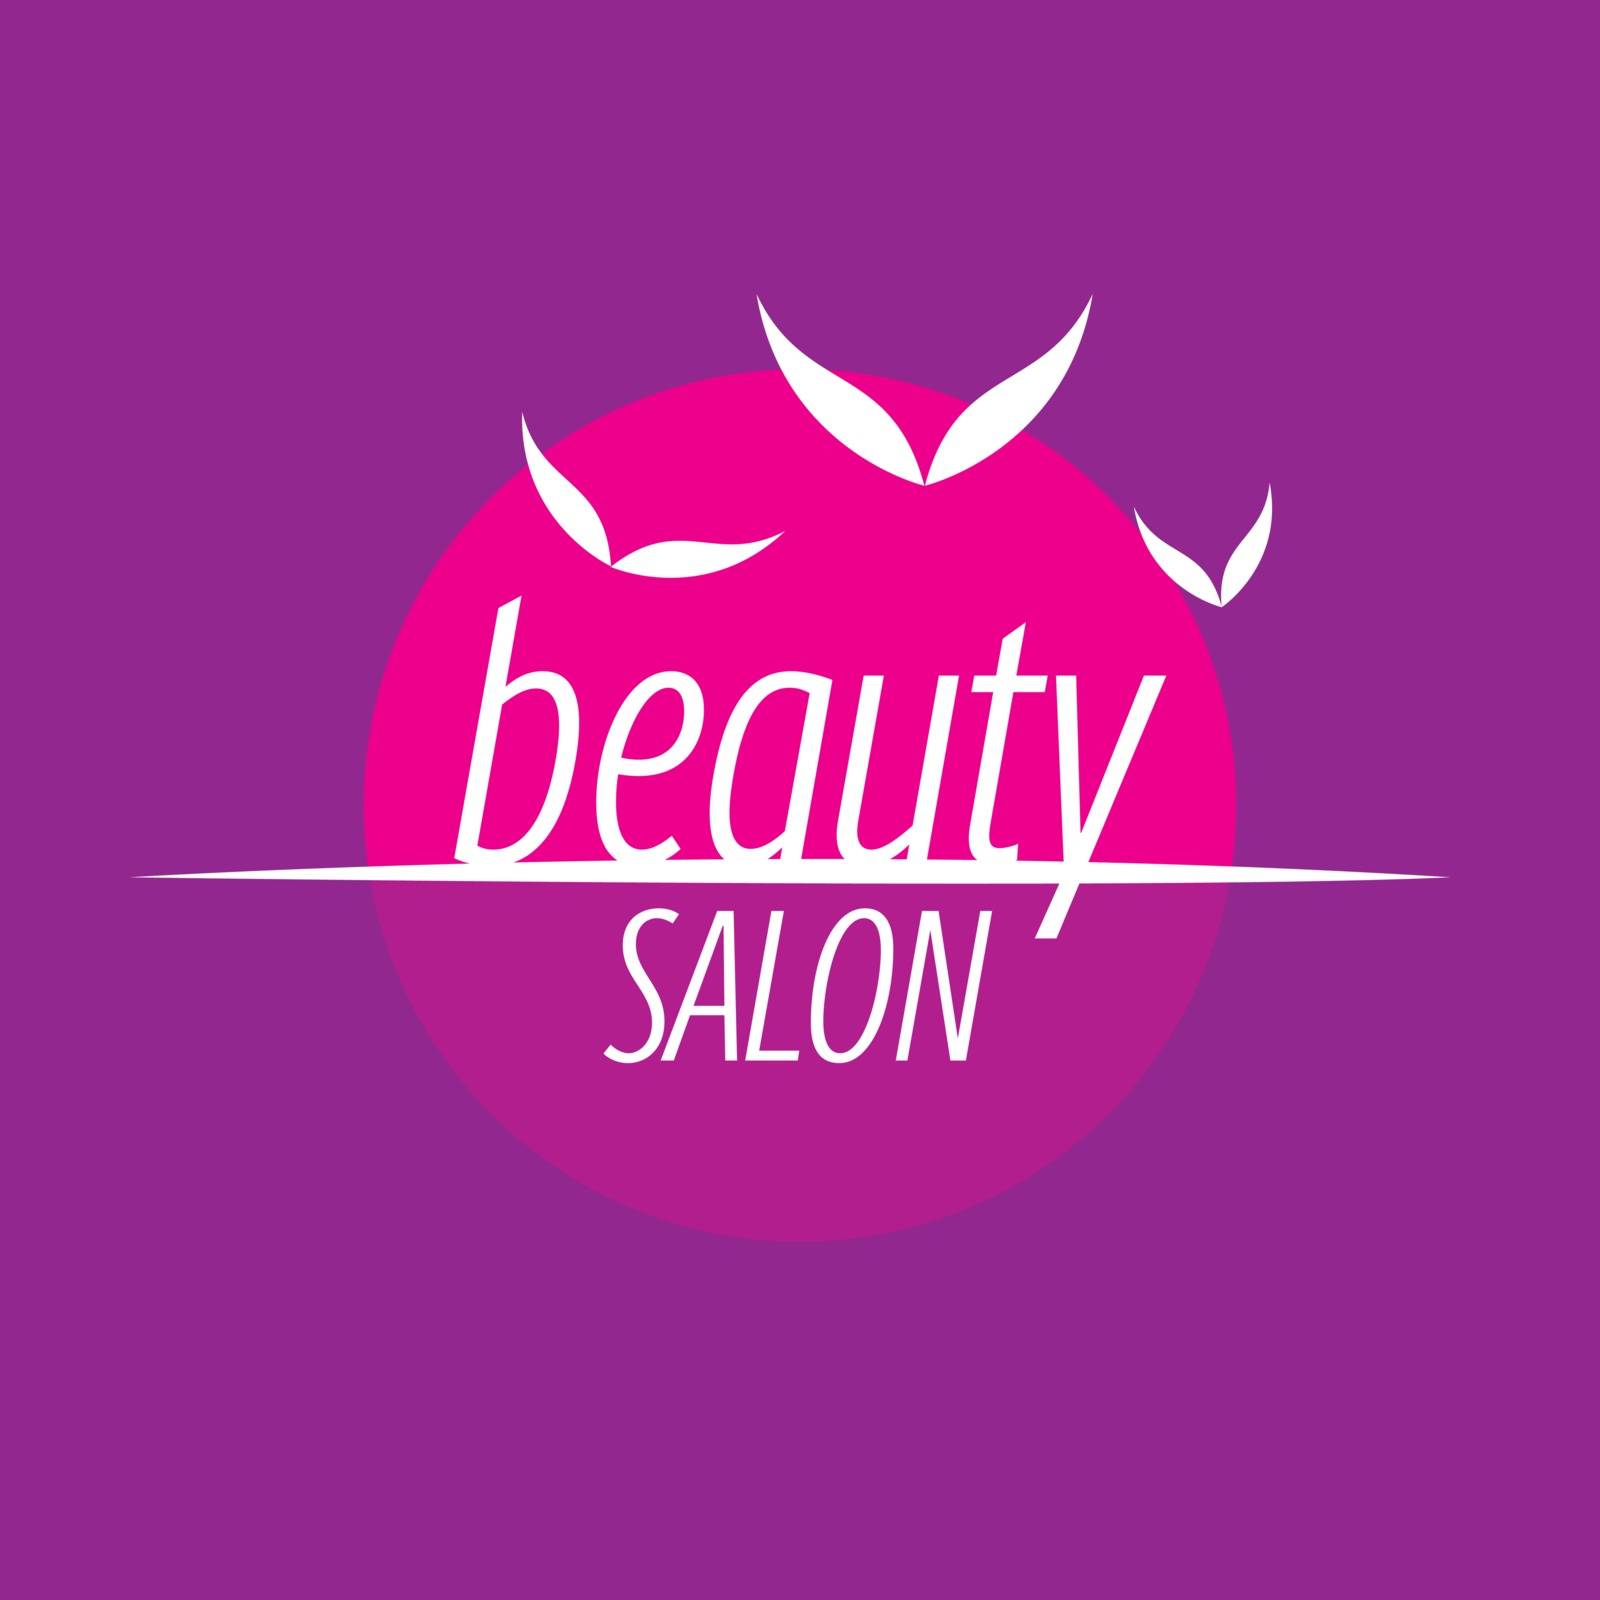 flowers design vector for spa, boutique, beauty salon, cosmetician